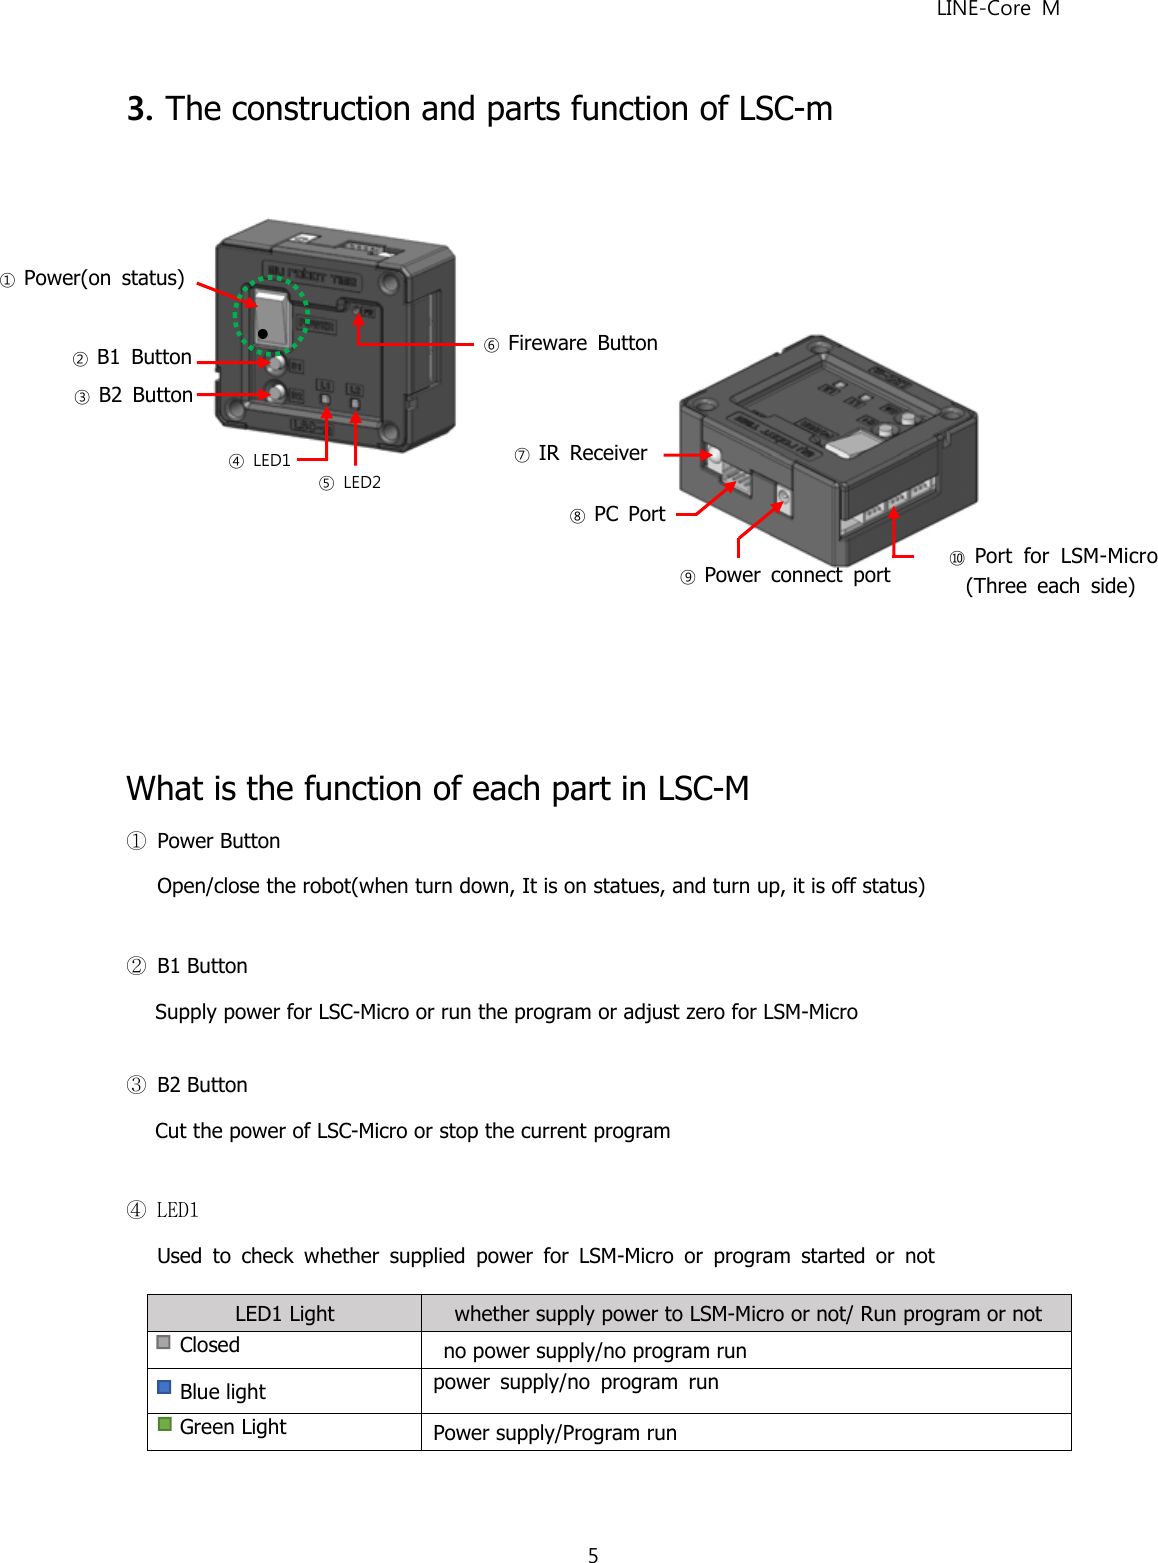 LINE-Core M53. The construction and parts function of LSC-mWhat is the function of each part in LSC-M①Power ButtonOpen/close the robot(when turn down, It is on statues, and turn up, it is off status)②B1 ButtonSupply power for LSC-Micro or run the program or adjust zero for LSM-Micro③B2 ButtonCut the power of LSC-Micro or stop the current program④ LED1Used to check whether supplied power for LSM-Micro or program started or notLED1 Lightwhether supply power to LSM-Micro or not/ Run program or notClosedno power supply/no program runBlue lightpower supply/no program runGreen LightPower supply/Program run⑦IR Receiver⑧PC Port⑨Power connect port⑩Port for LSM-Micro(Three each side)⑥Fireware Button①Power(on status)②B1 Button③B2 Button④ LED1⑤ LED2